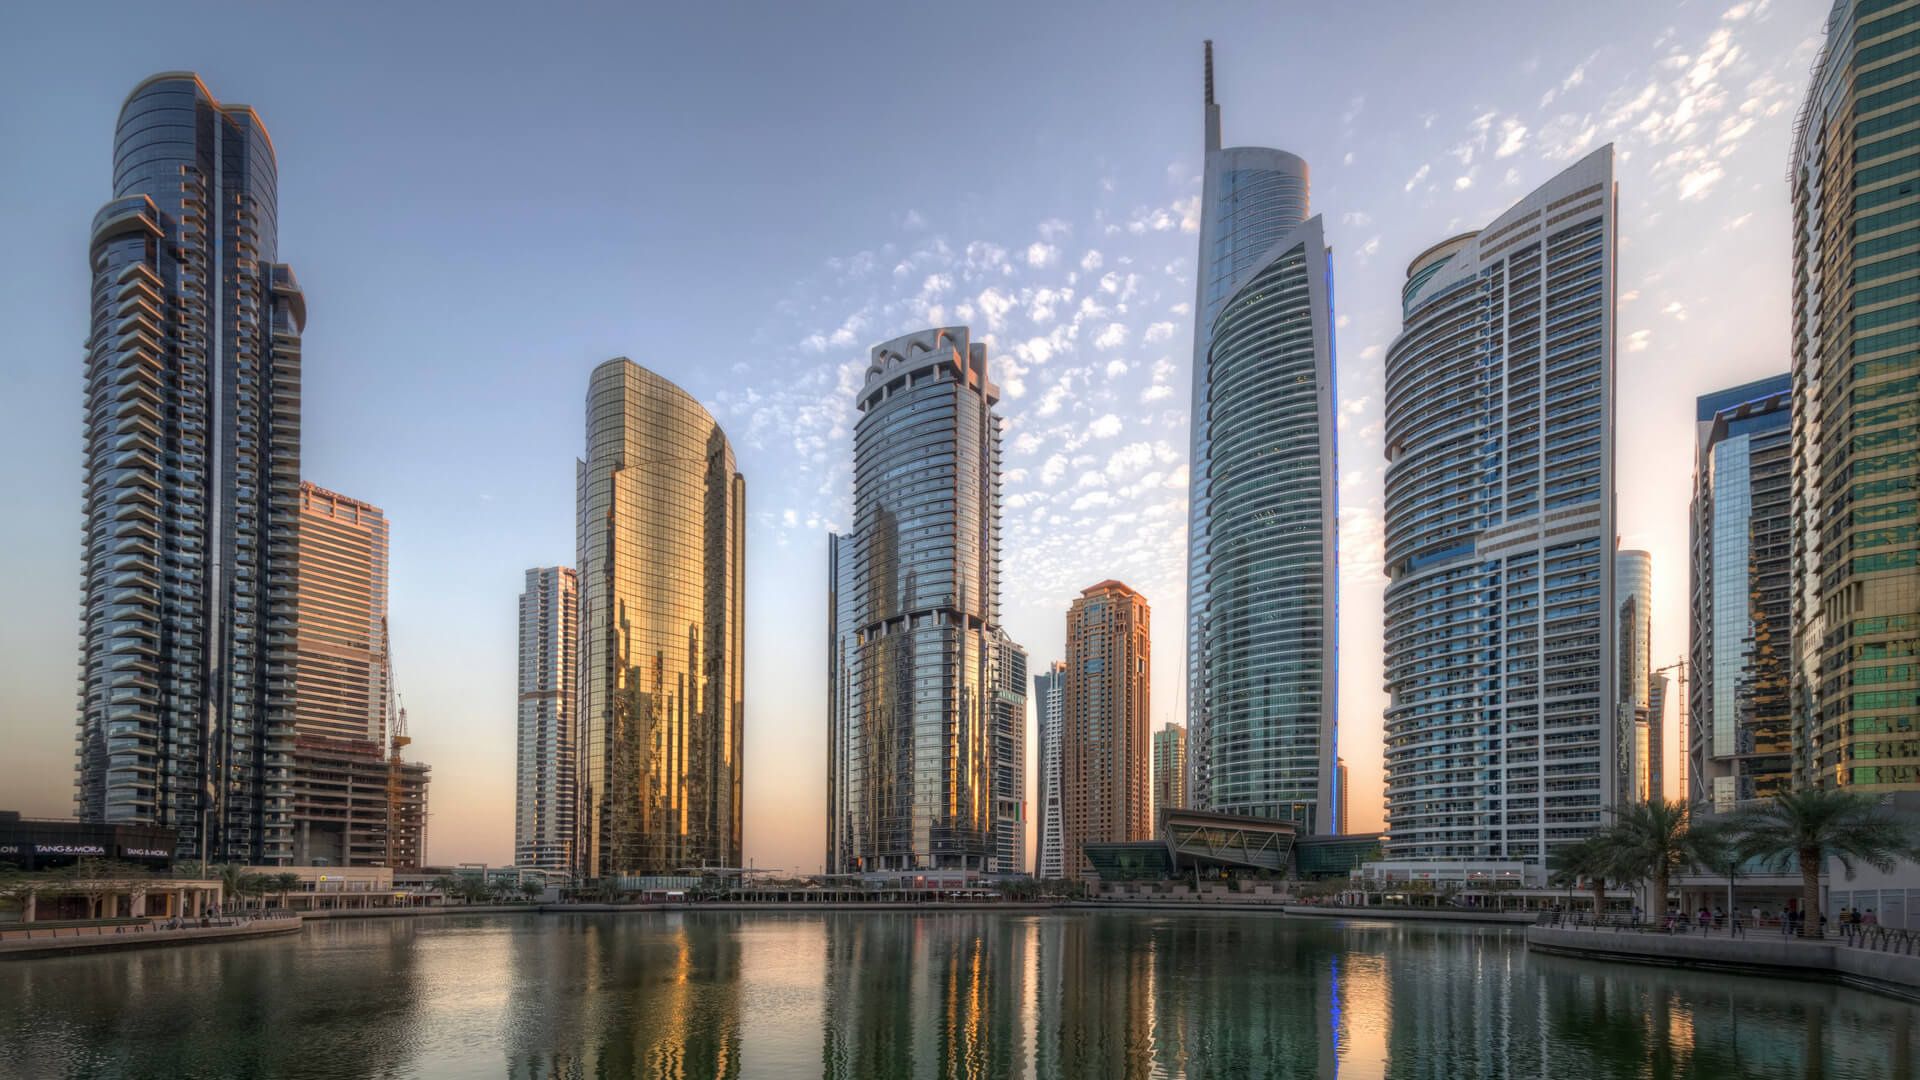 About Jumeirah Lake Towers